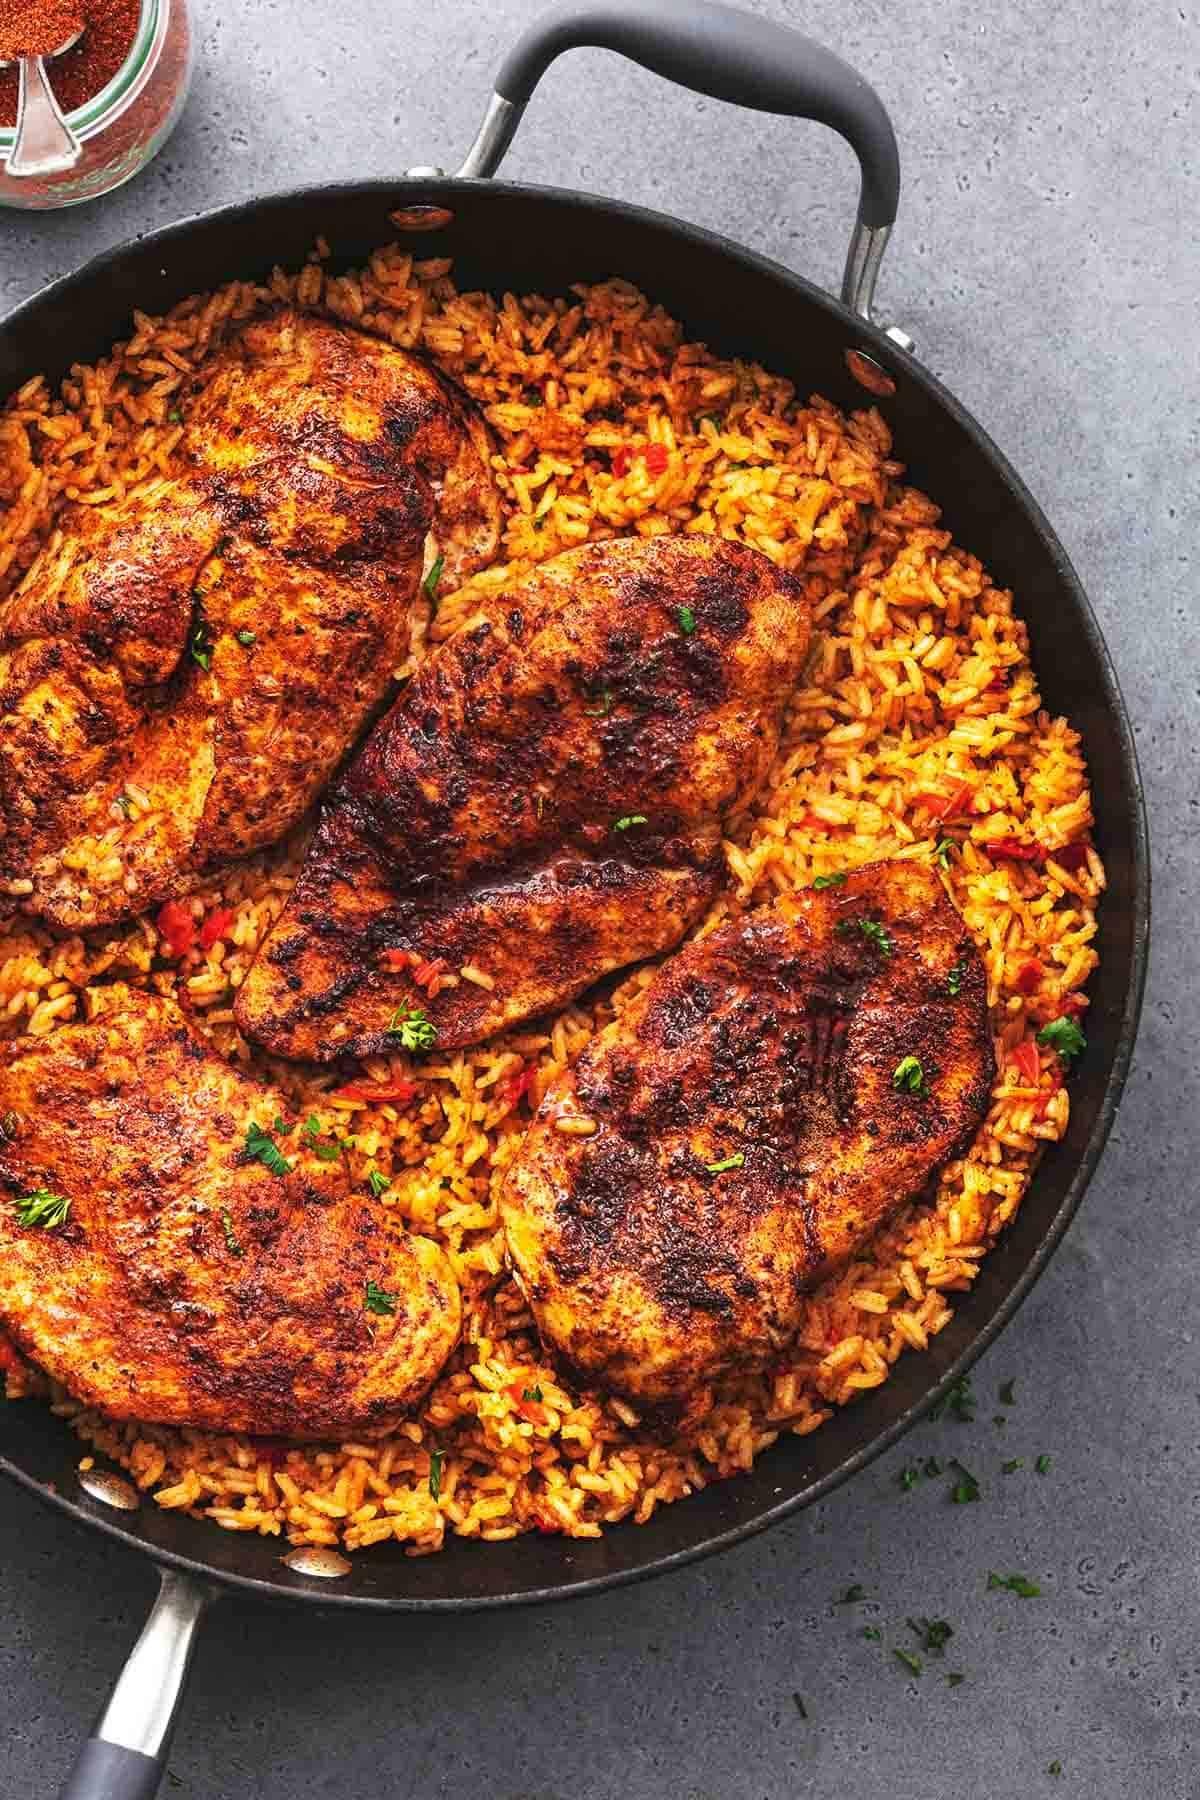 Spice Up Your Dinner Routine with this Easy One-Pot Cajun Chicken and Rice Recipe